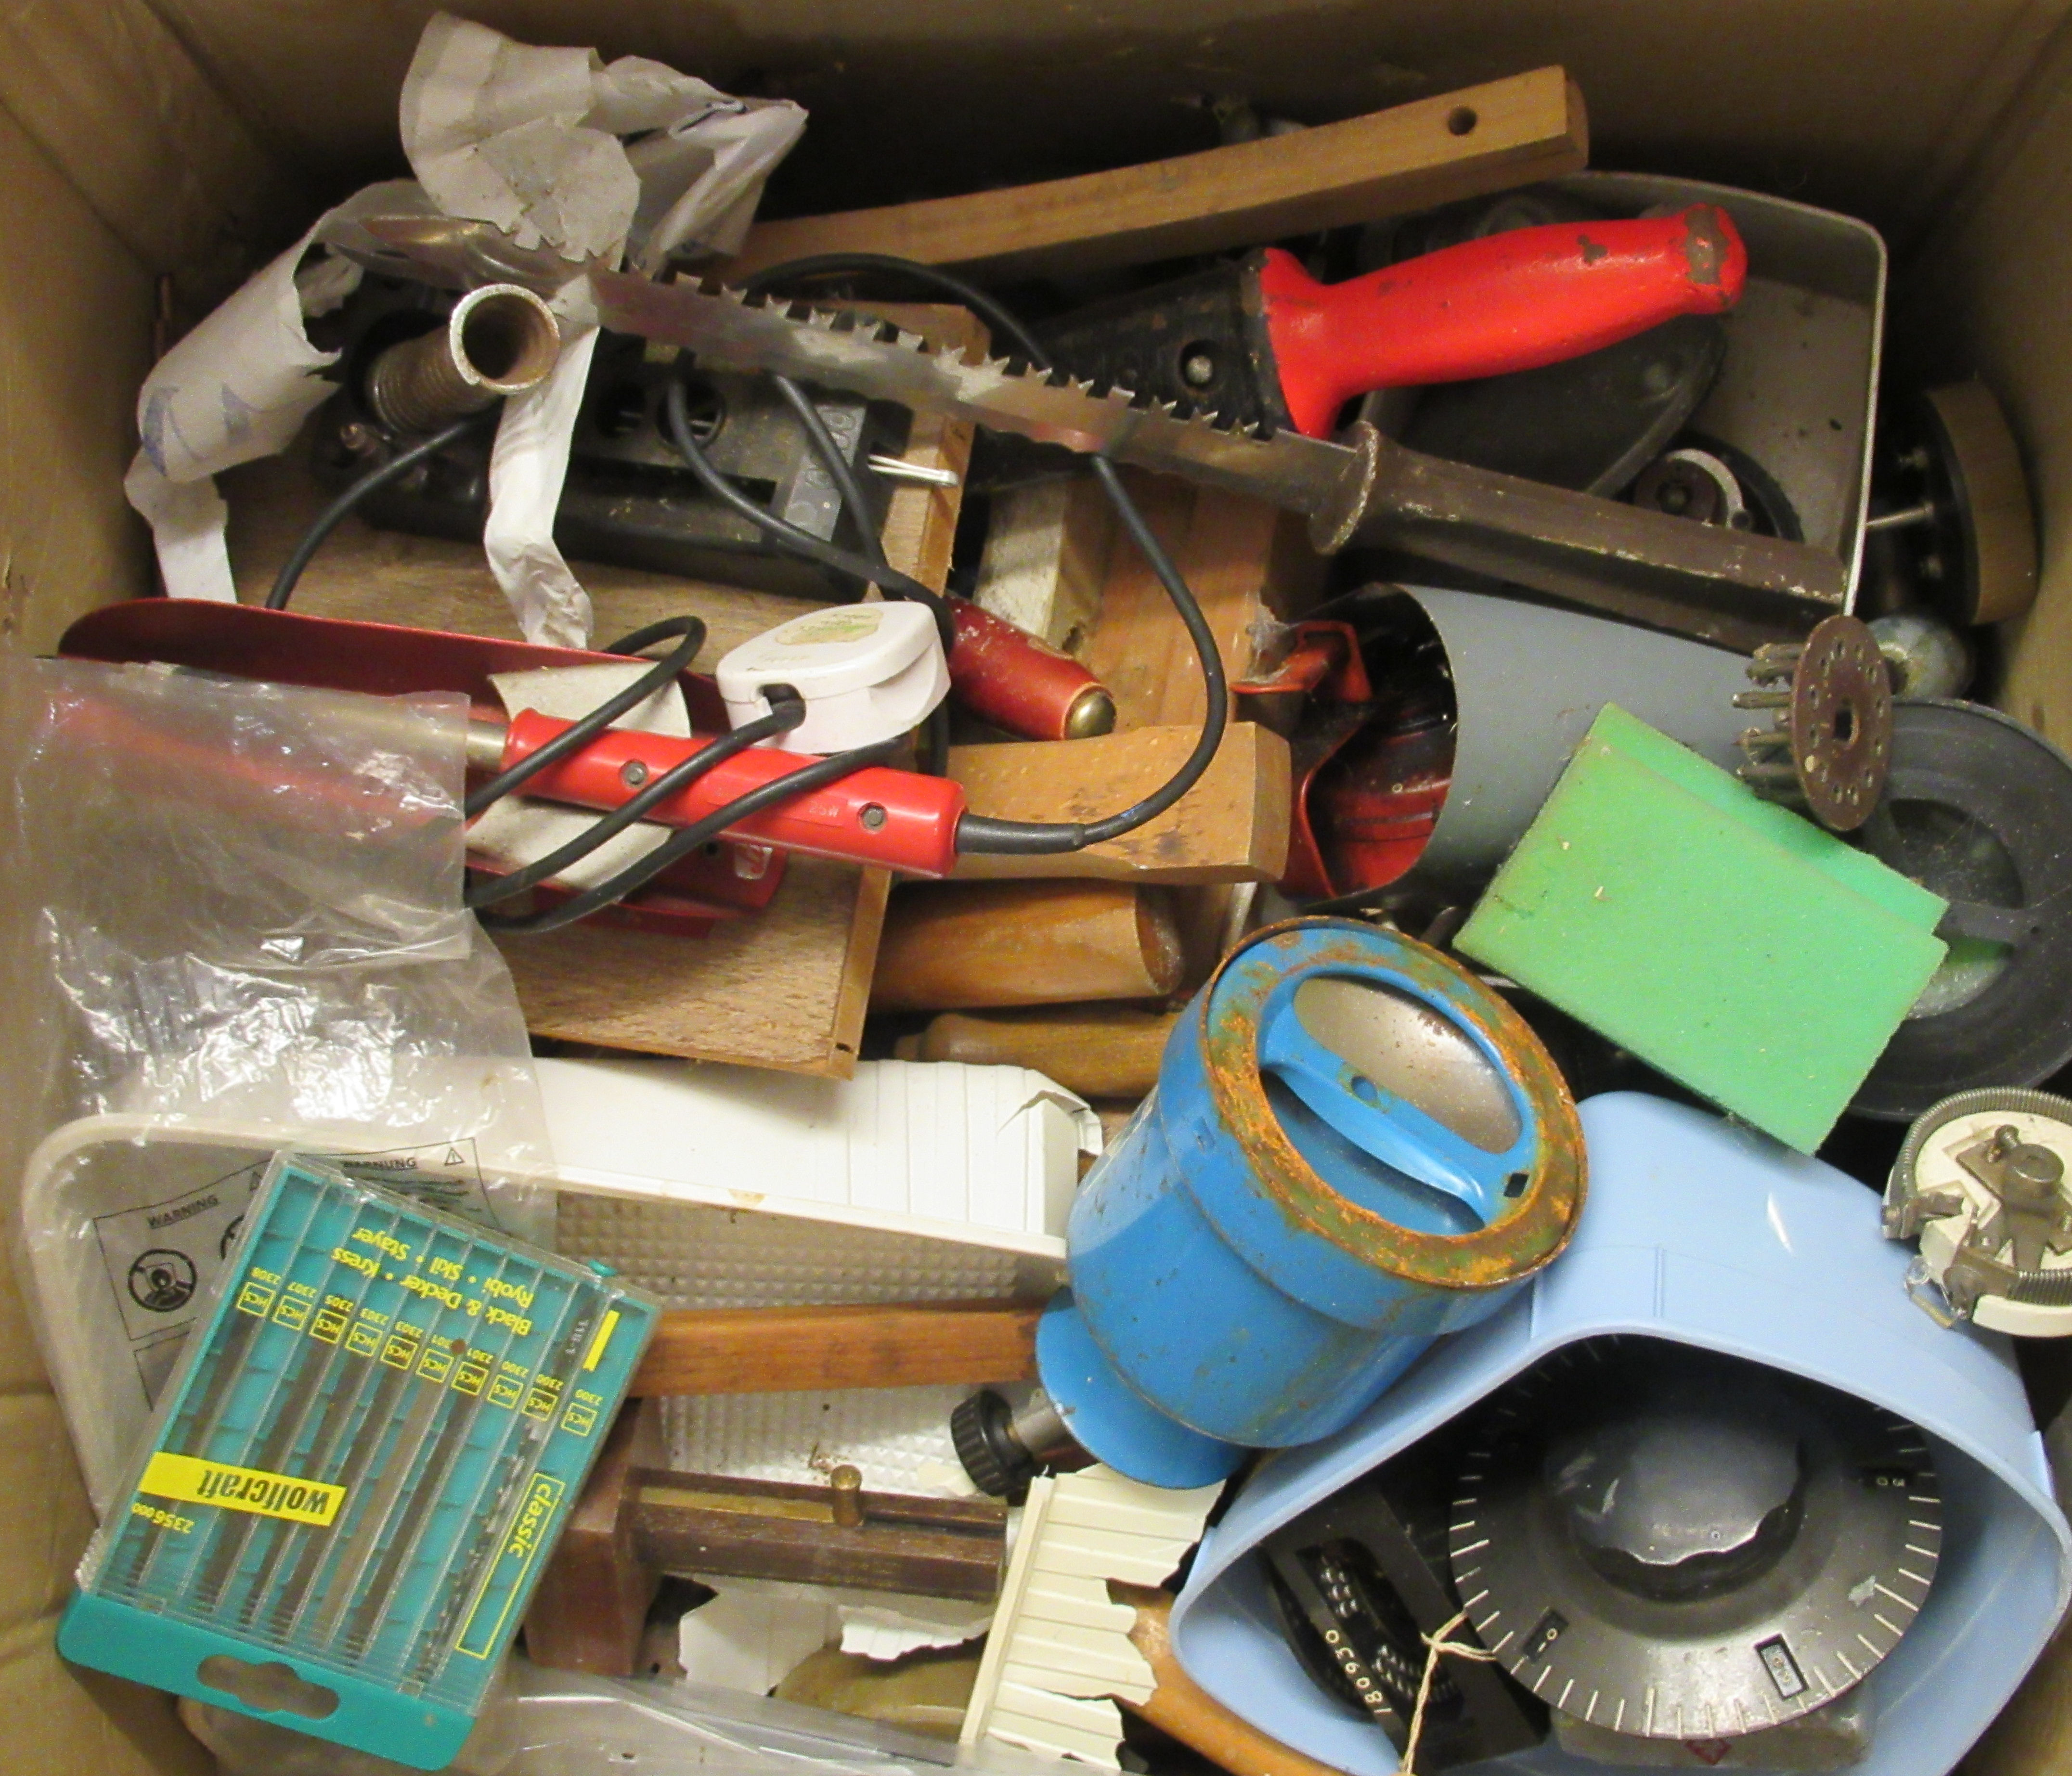 A miscellany of handtools, drill bits, - Image 7 of 7